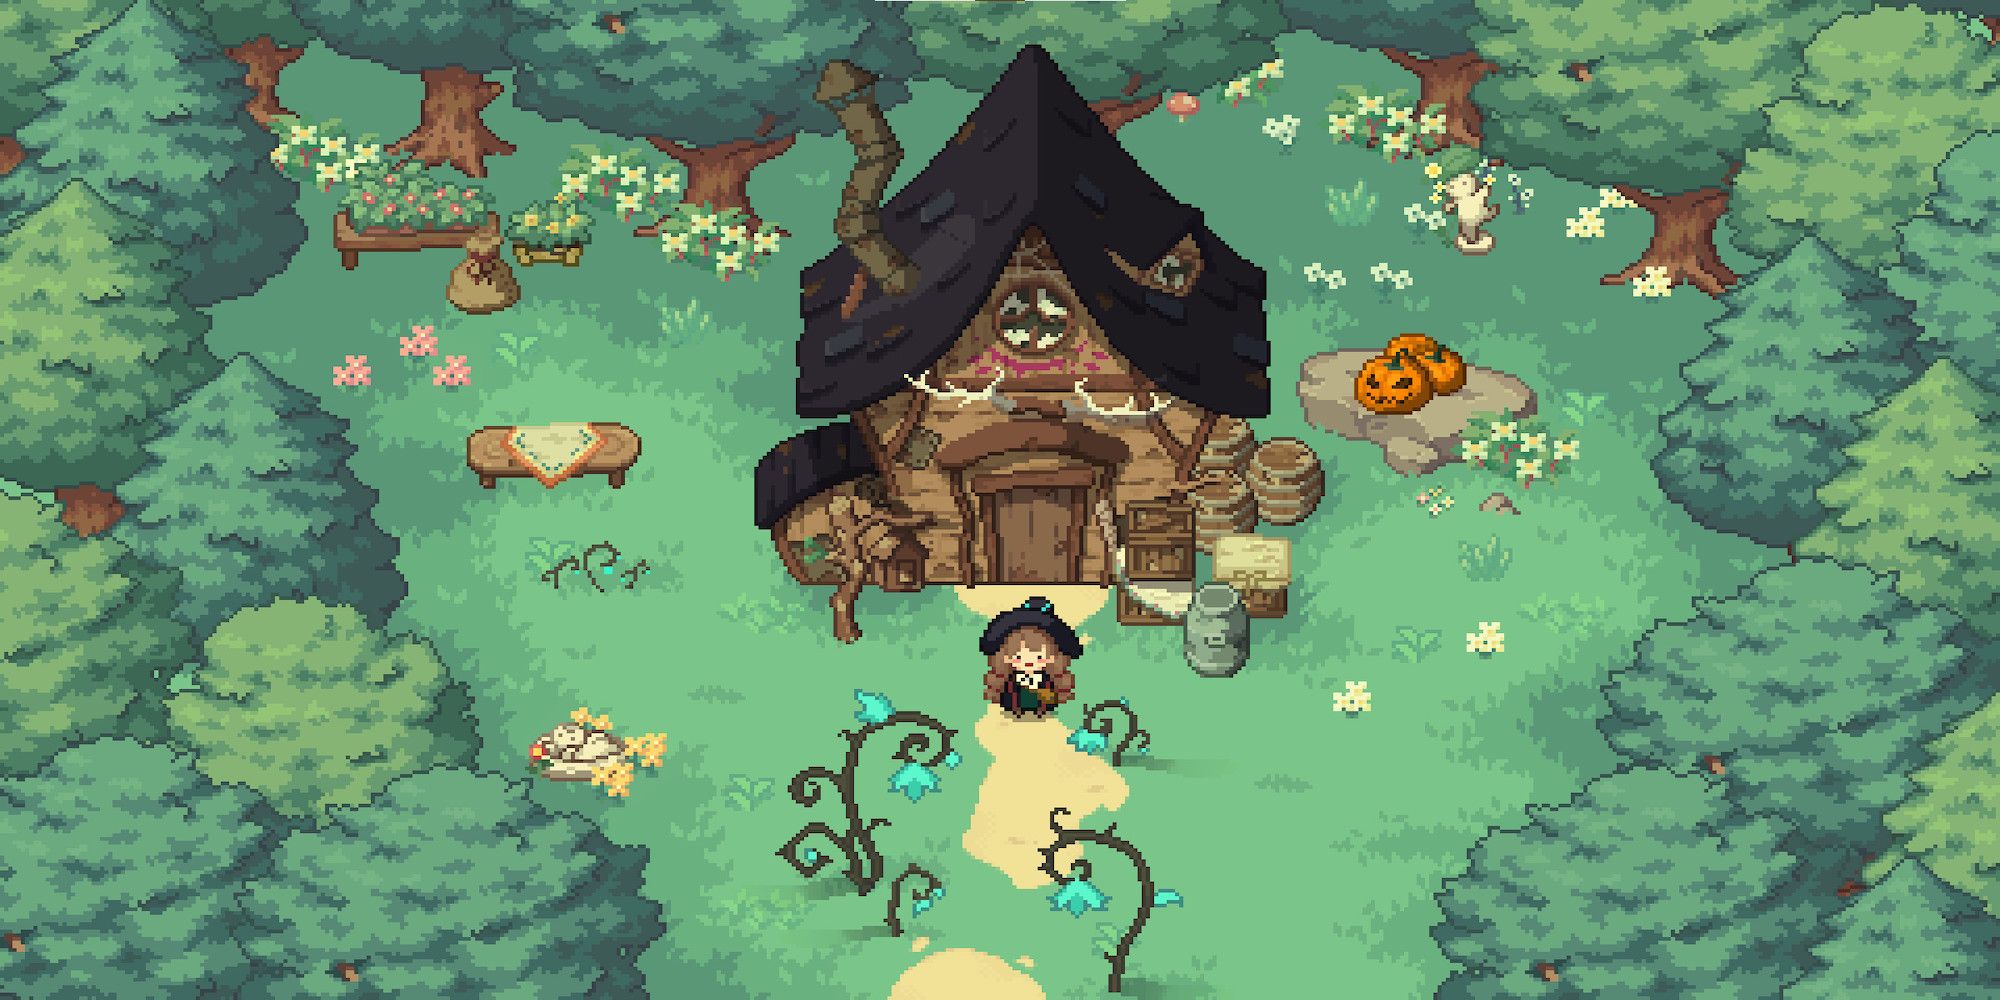 An old house in the middle of the forest (Little Witch in the Woods)